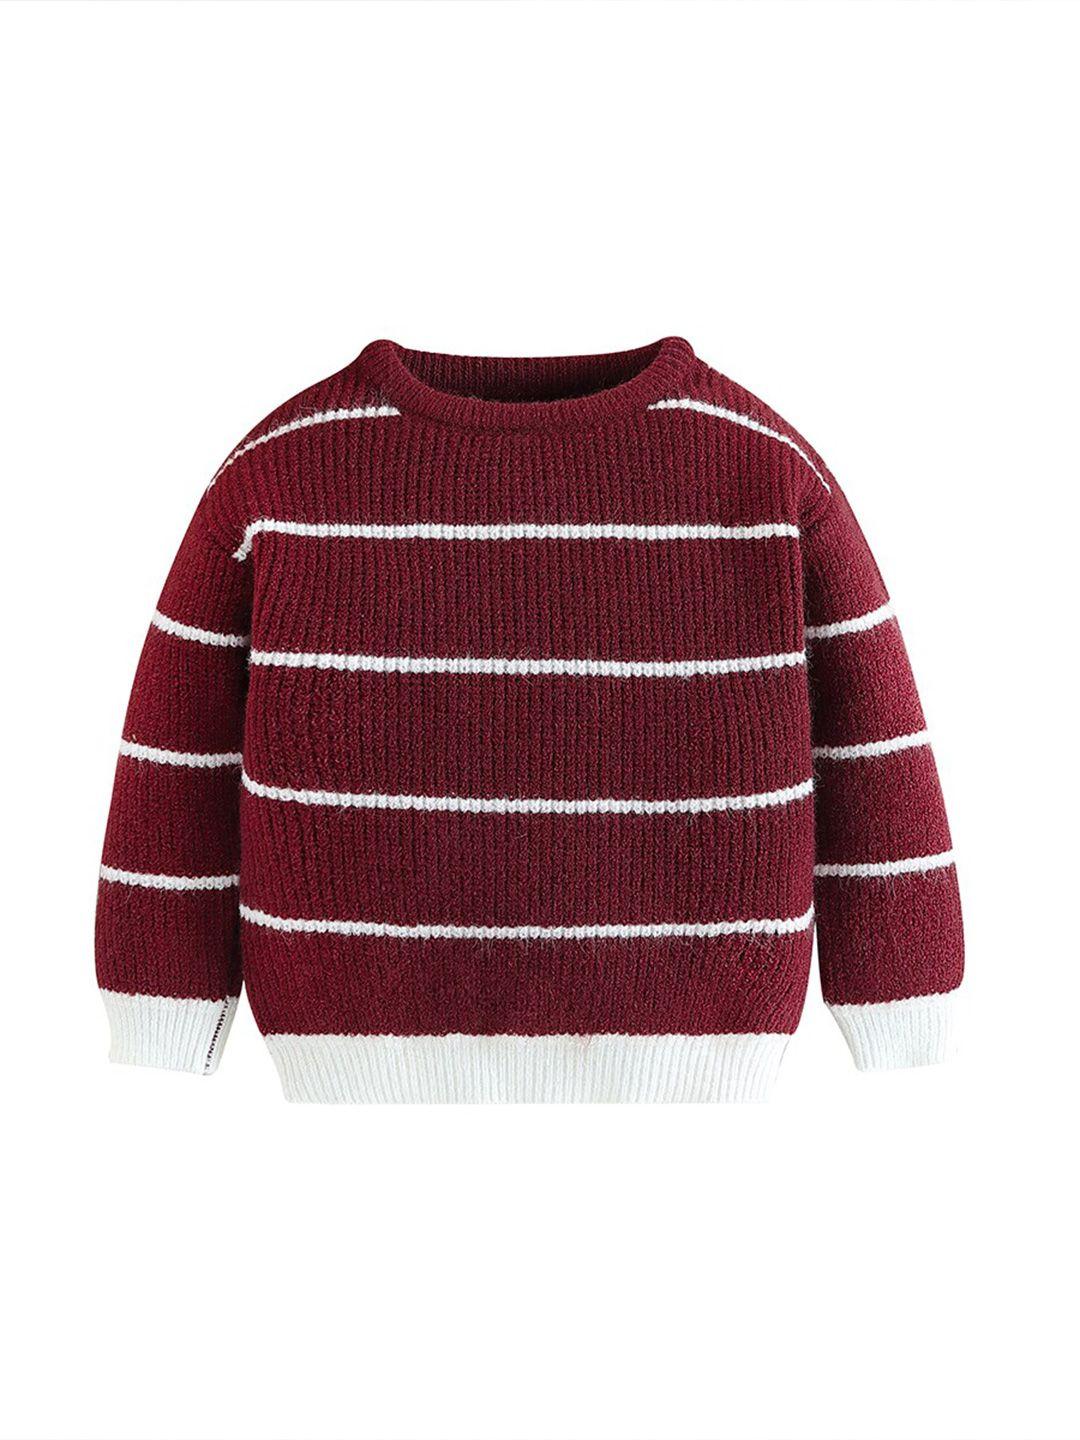 stylecast boys brown striped cotton pullover sweater